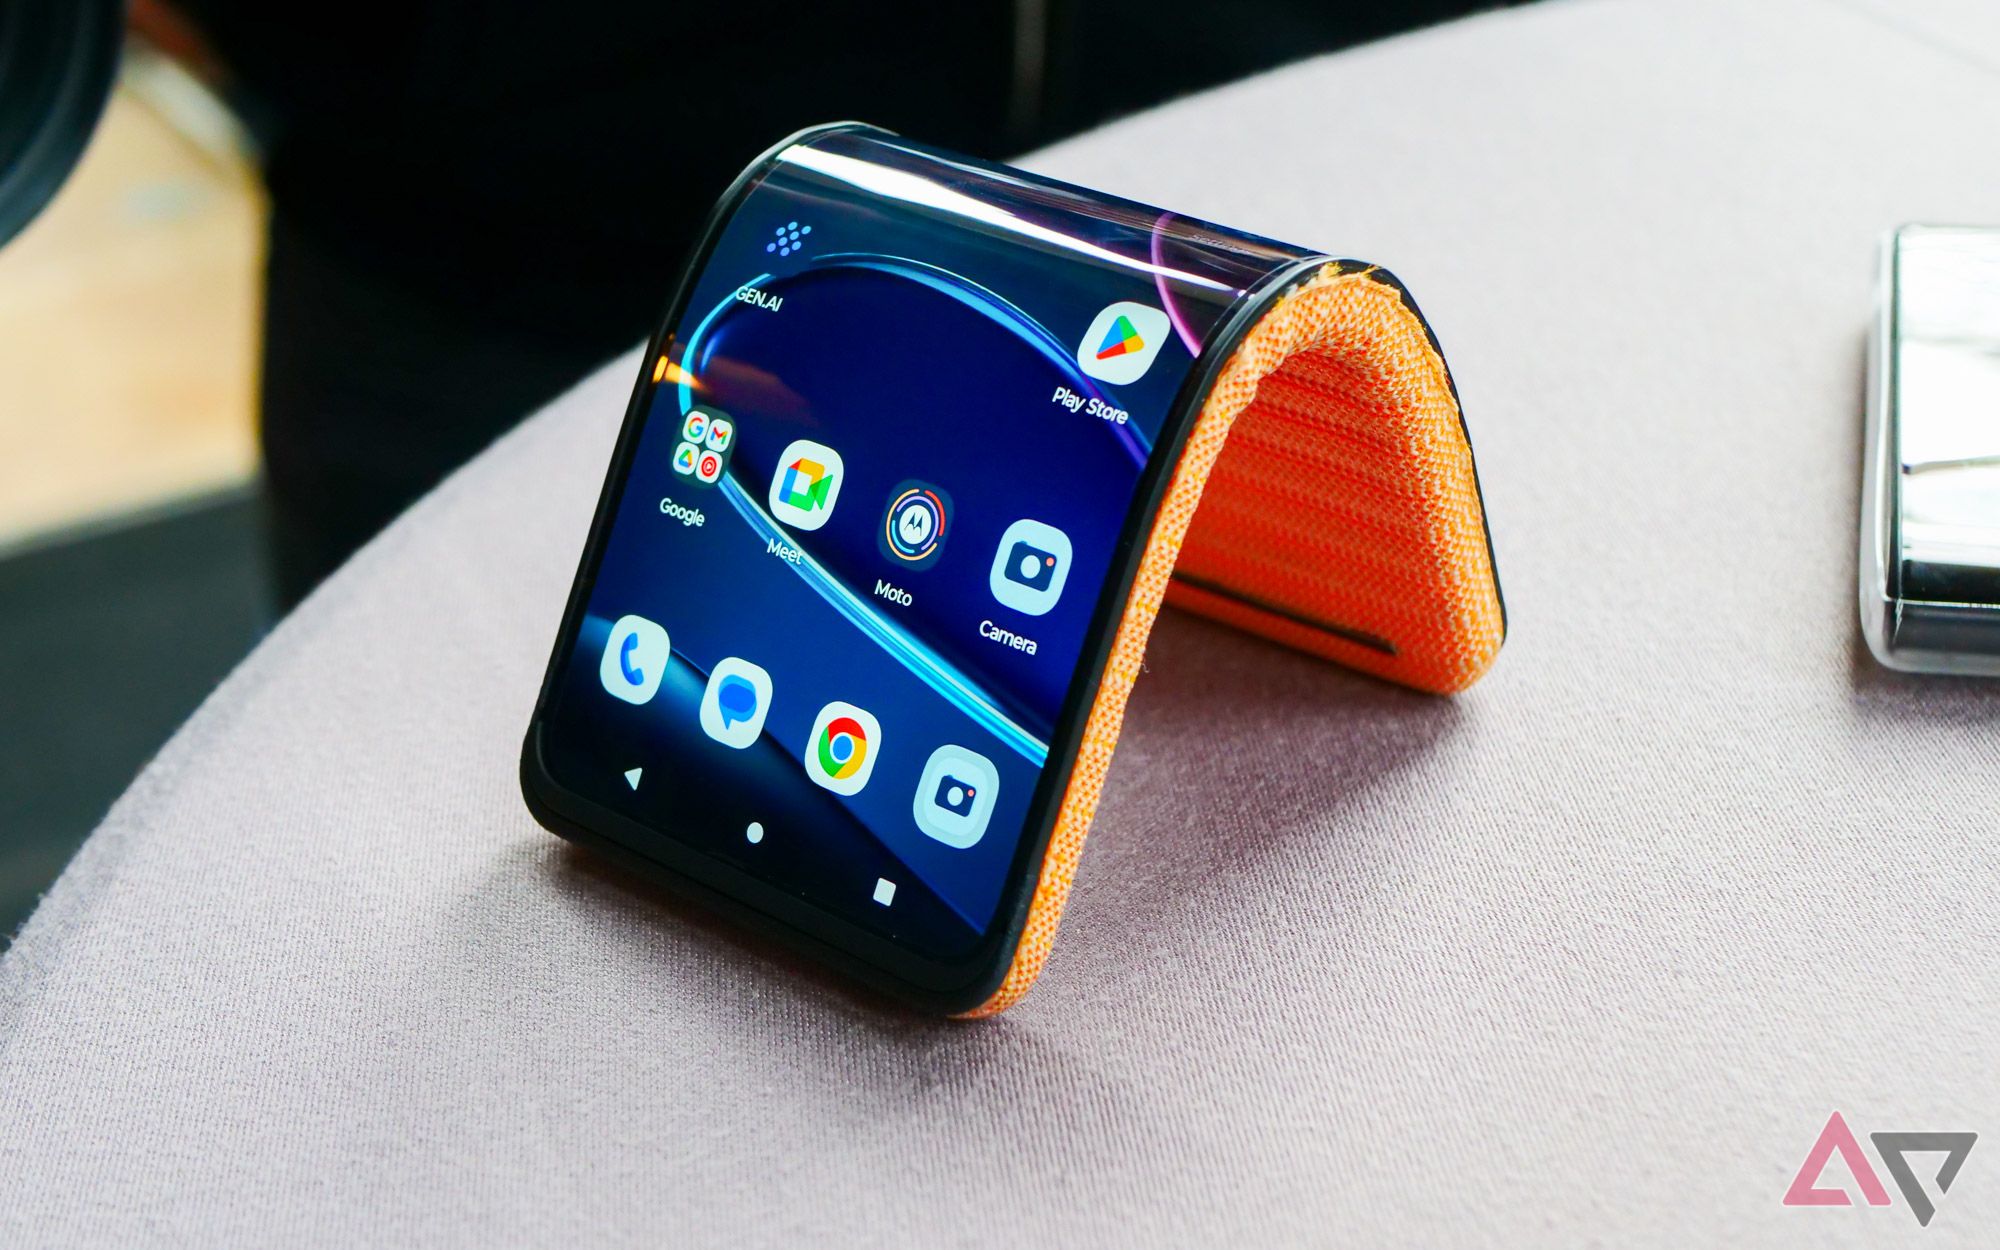 Motorola's bendable phone sitting in tent mode on a table